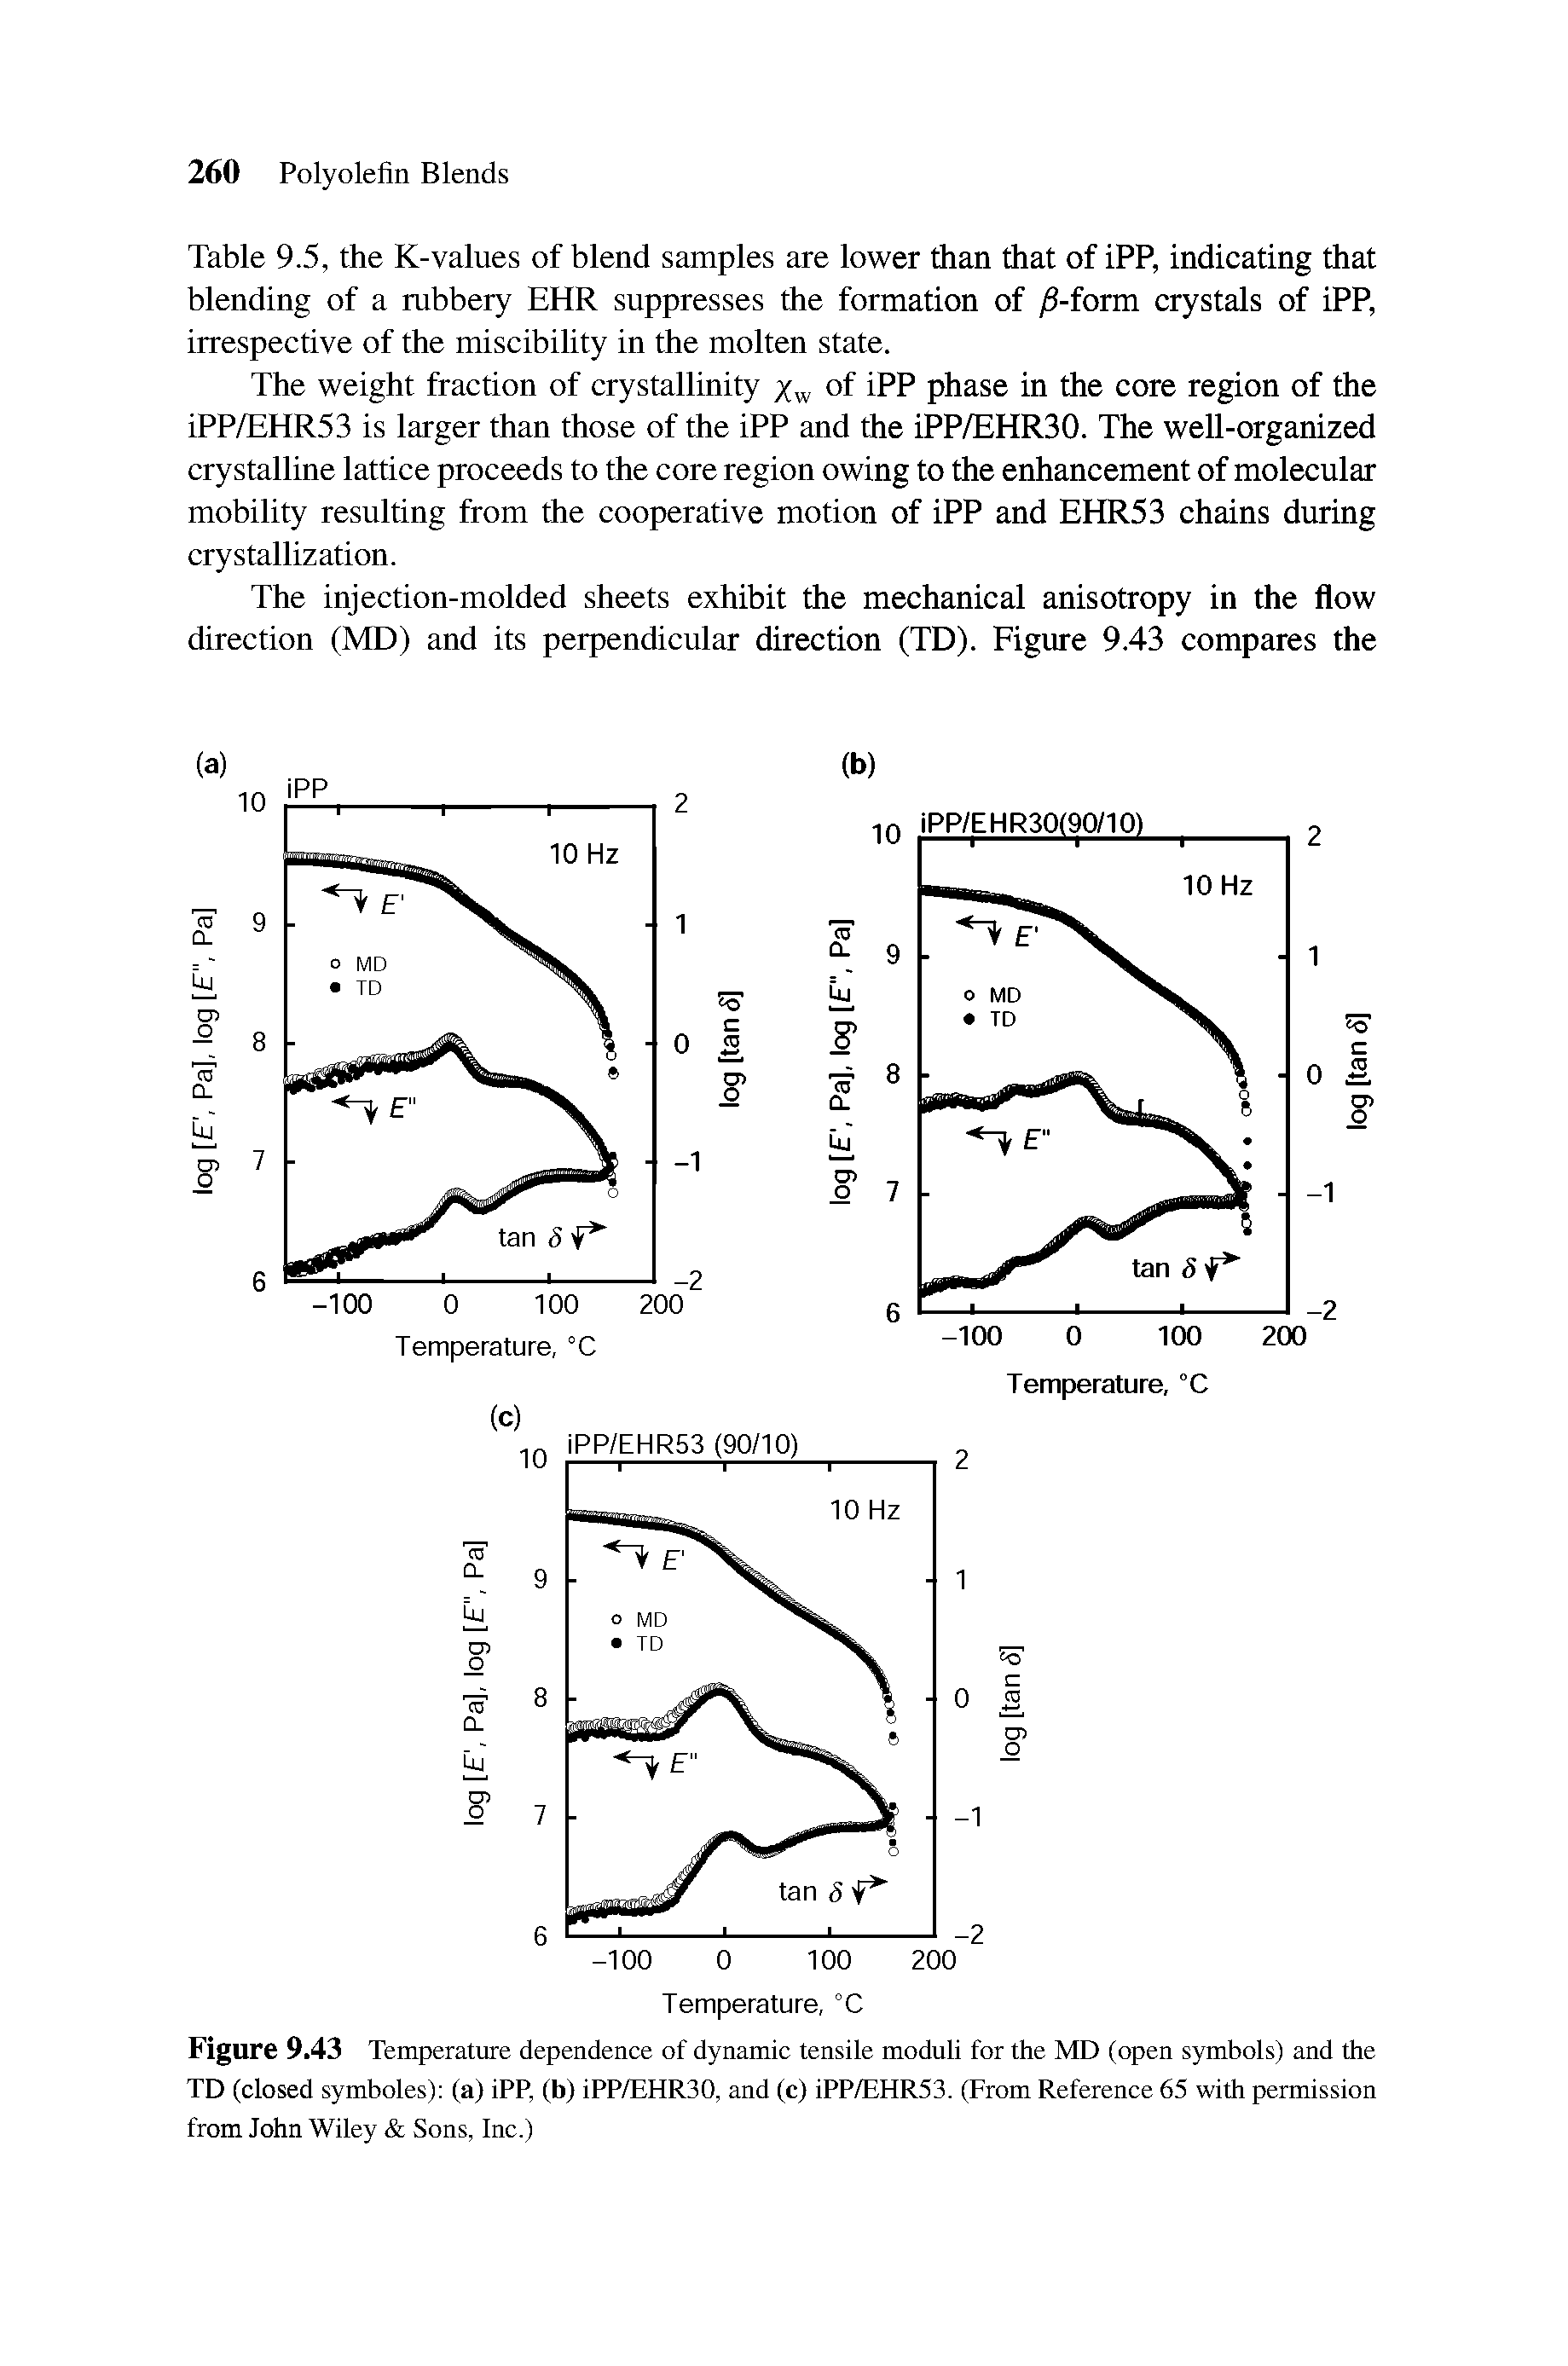 Figure 9.43 Temperature dependence of dynamic tensile moduli for the MD (open symbols) and the TD (closed symboles) (a) iPP, (b) iPP/EHR30, and (c) iPP/EHR53. (From Reference 65 with permission from John Wiley Sons, Inc.)...